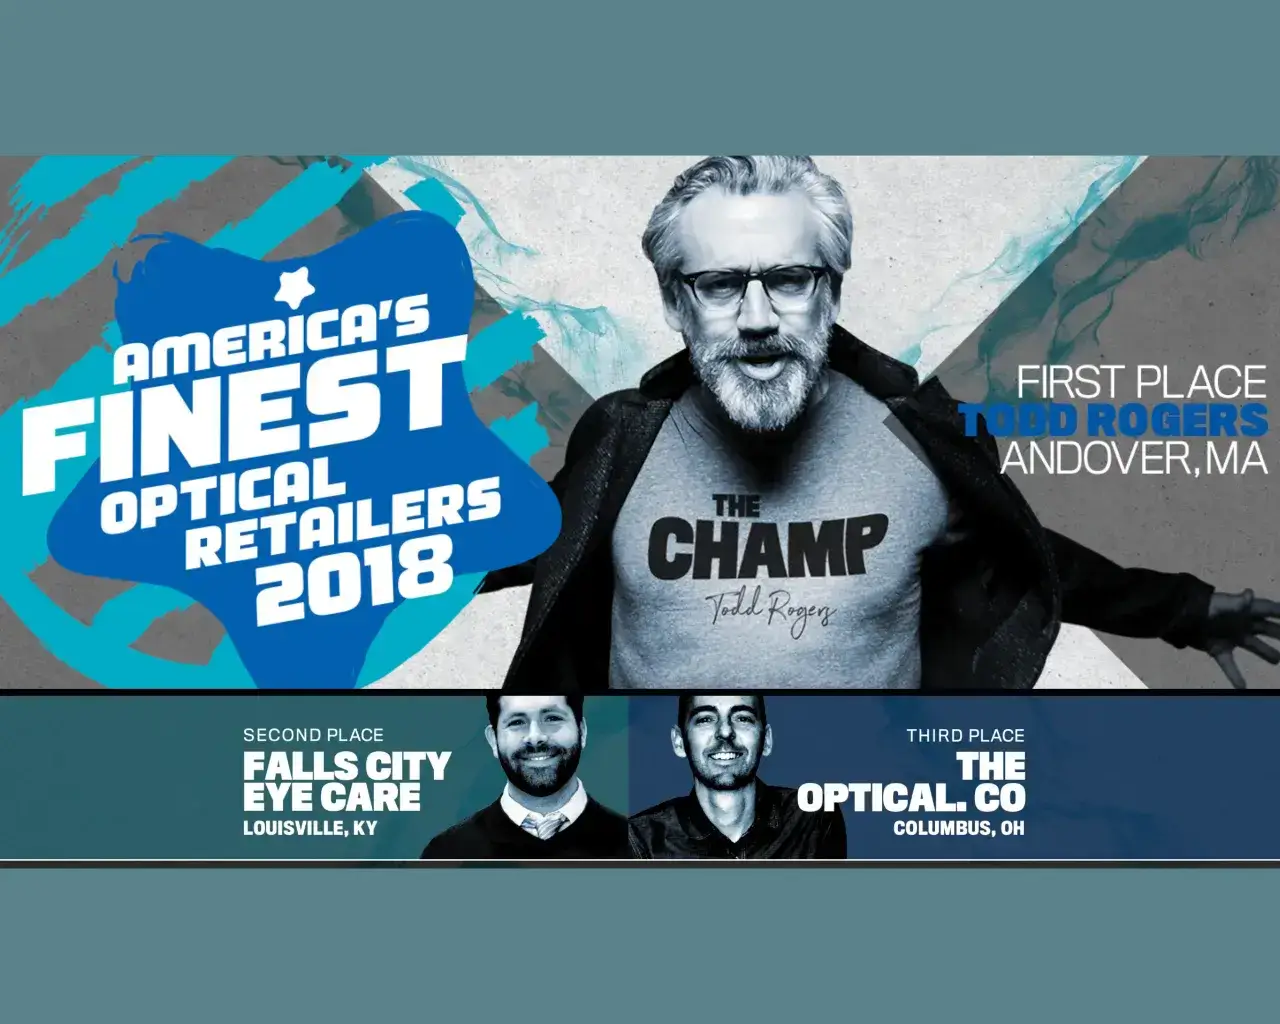 INVISION magazine America's Finest Optical Retailers of 2015 featuring Dr. Miller of The Optical Co